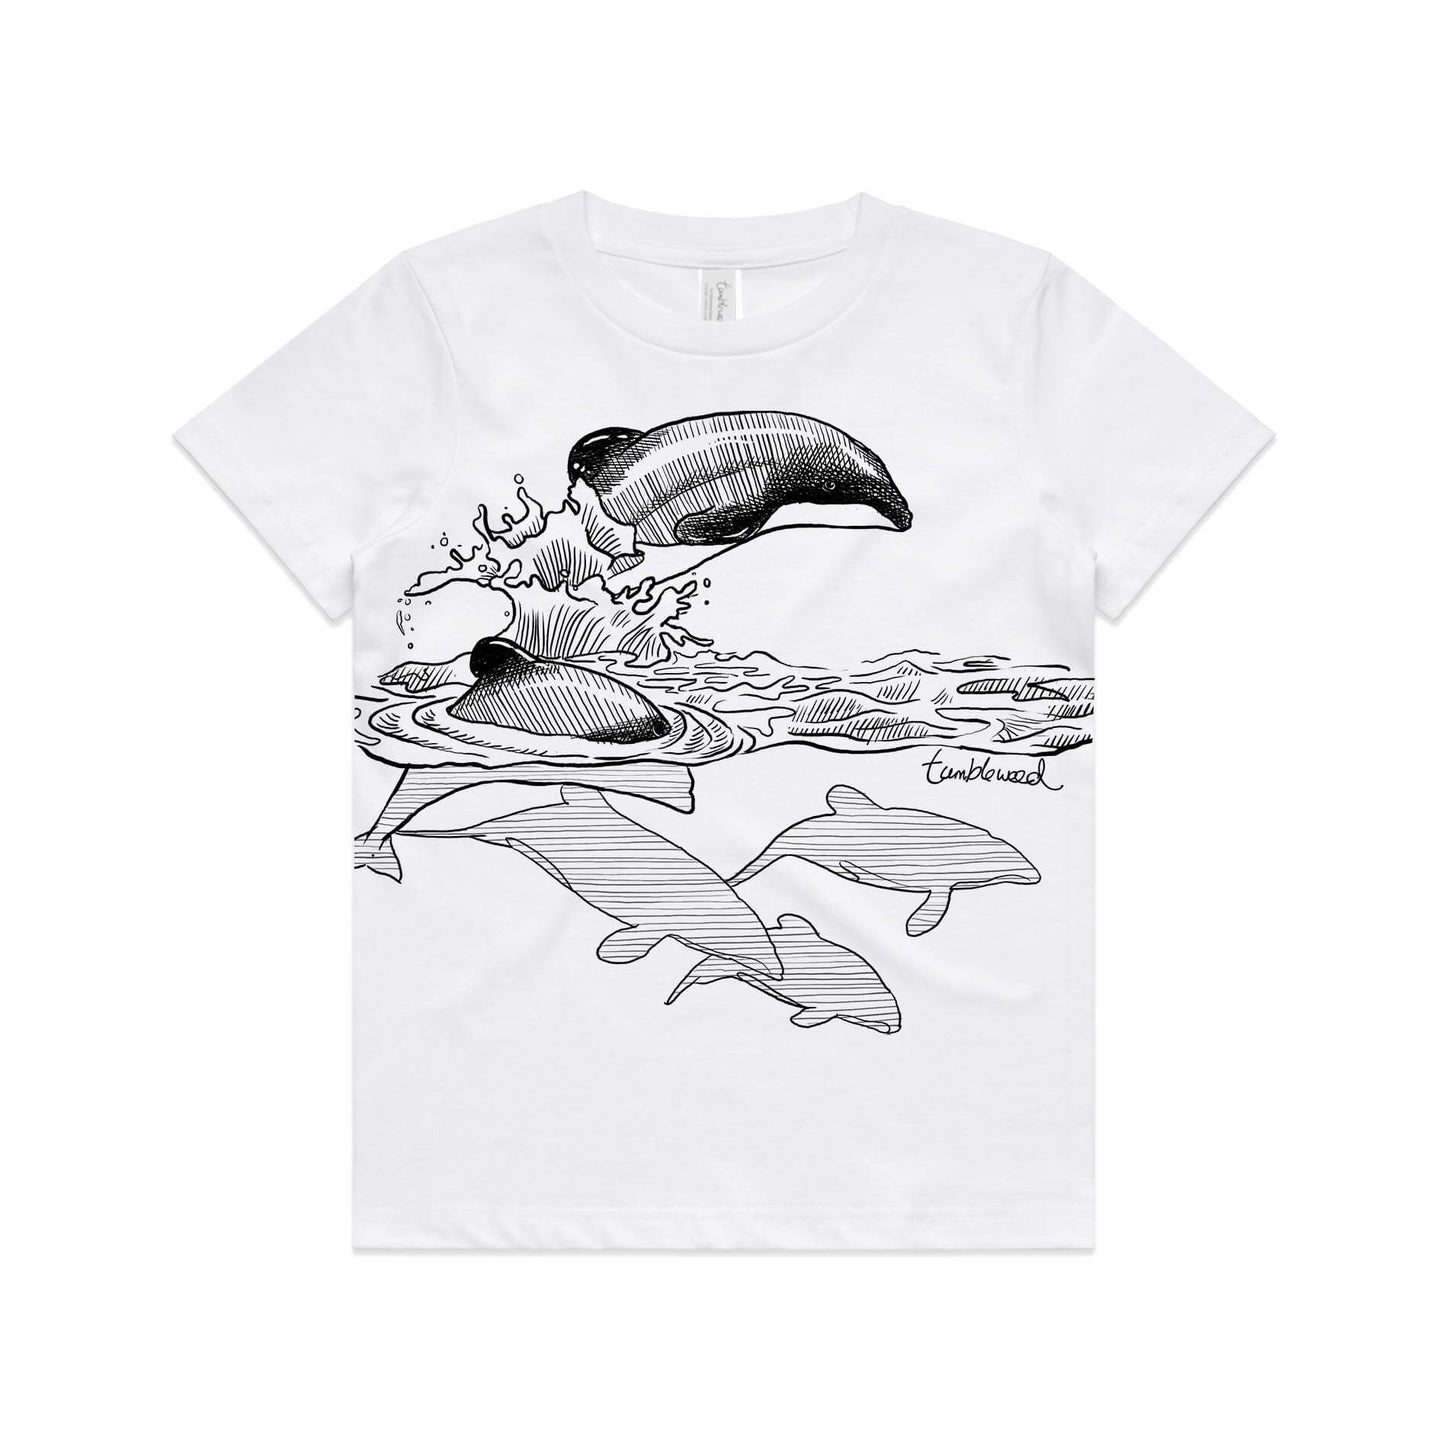 White, cotton kids' t-shirt with screen printed ducks maui dolphin design.